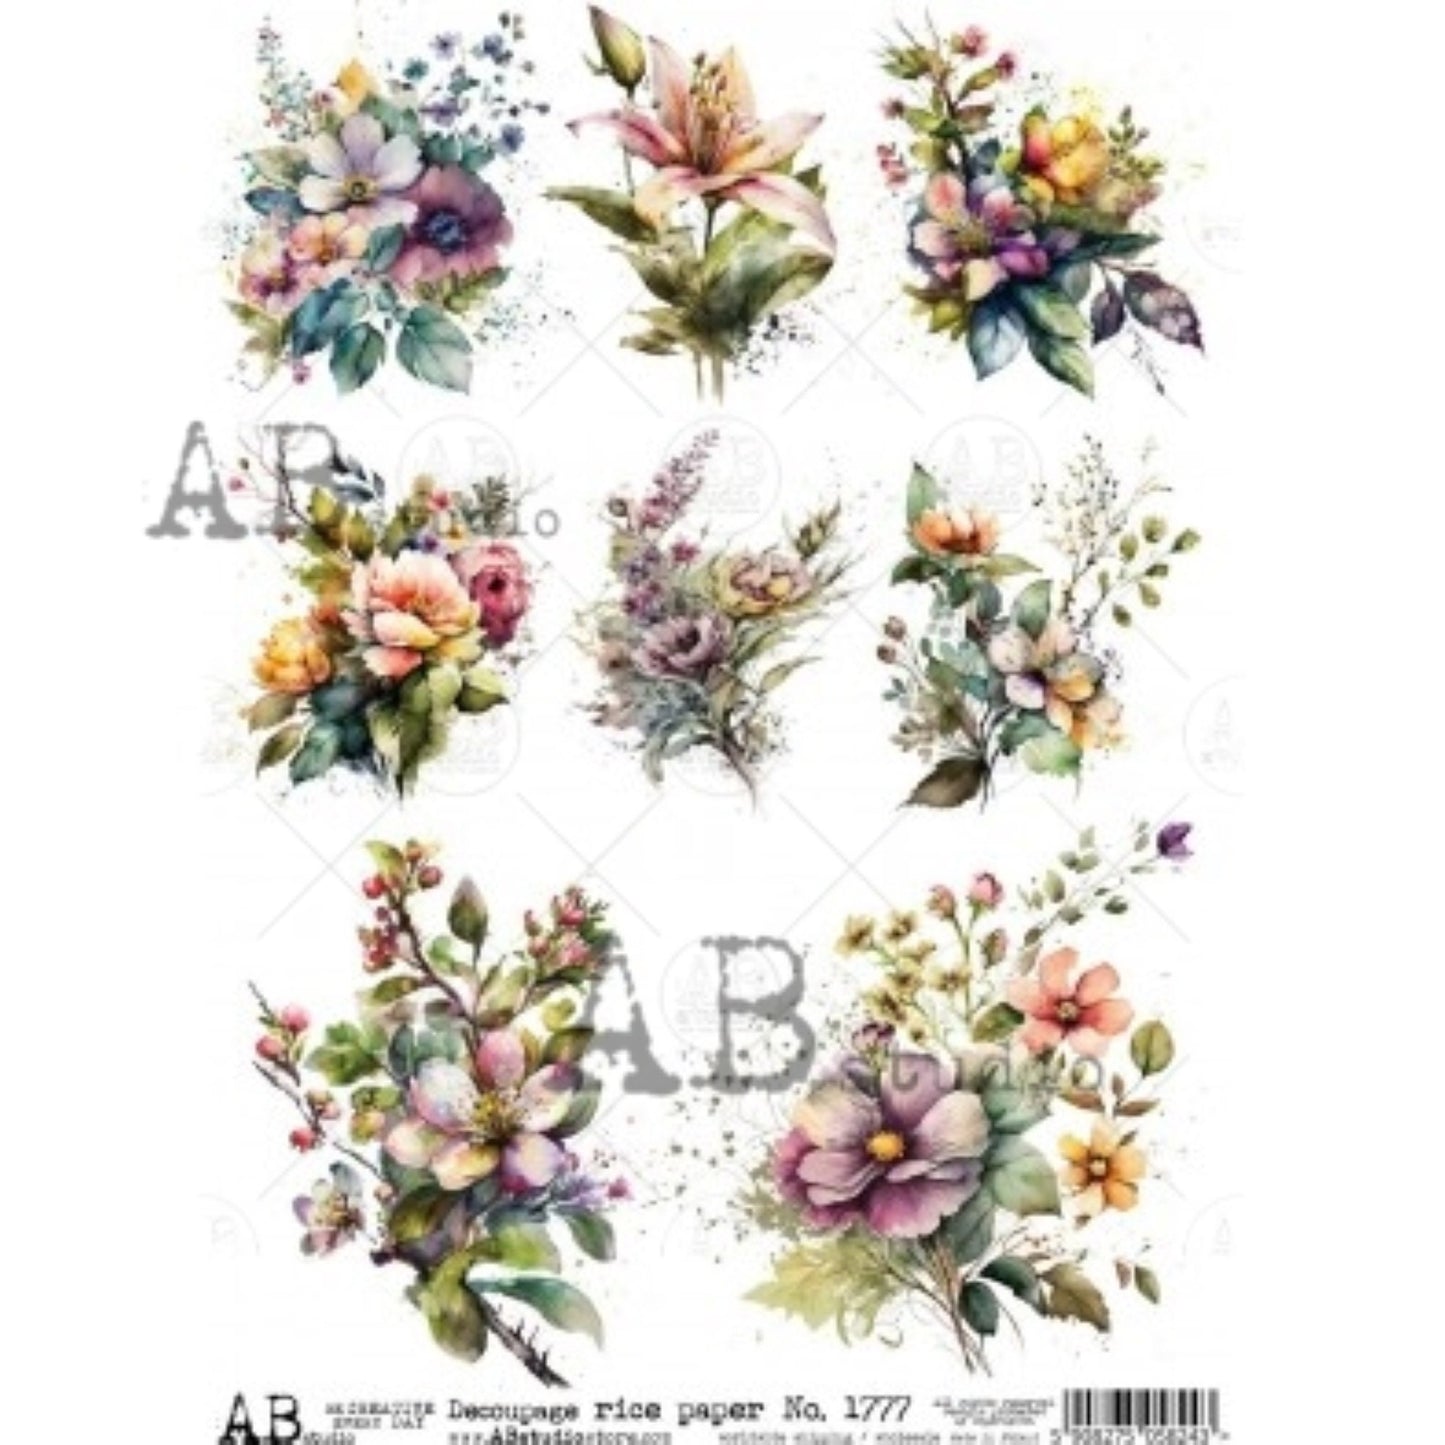 AB Studio, Rice Paper for Decoupage, Floral, Flowers, Bouquets, Shabby Chic, Vintage, Wallpaper, 1777, A4 8.27 X 11.69 Imported Poland